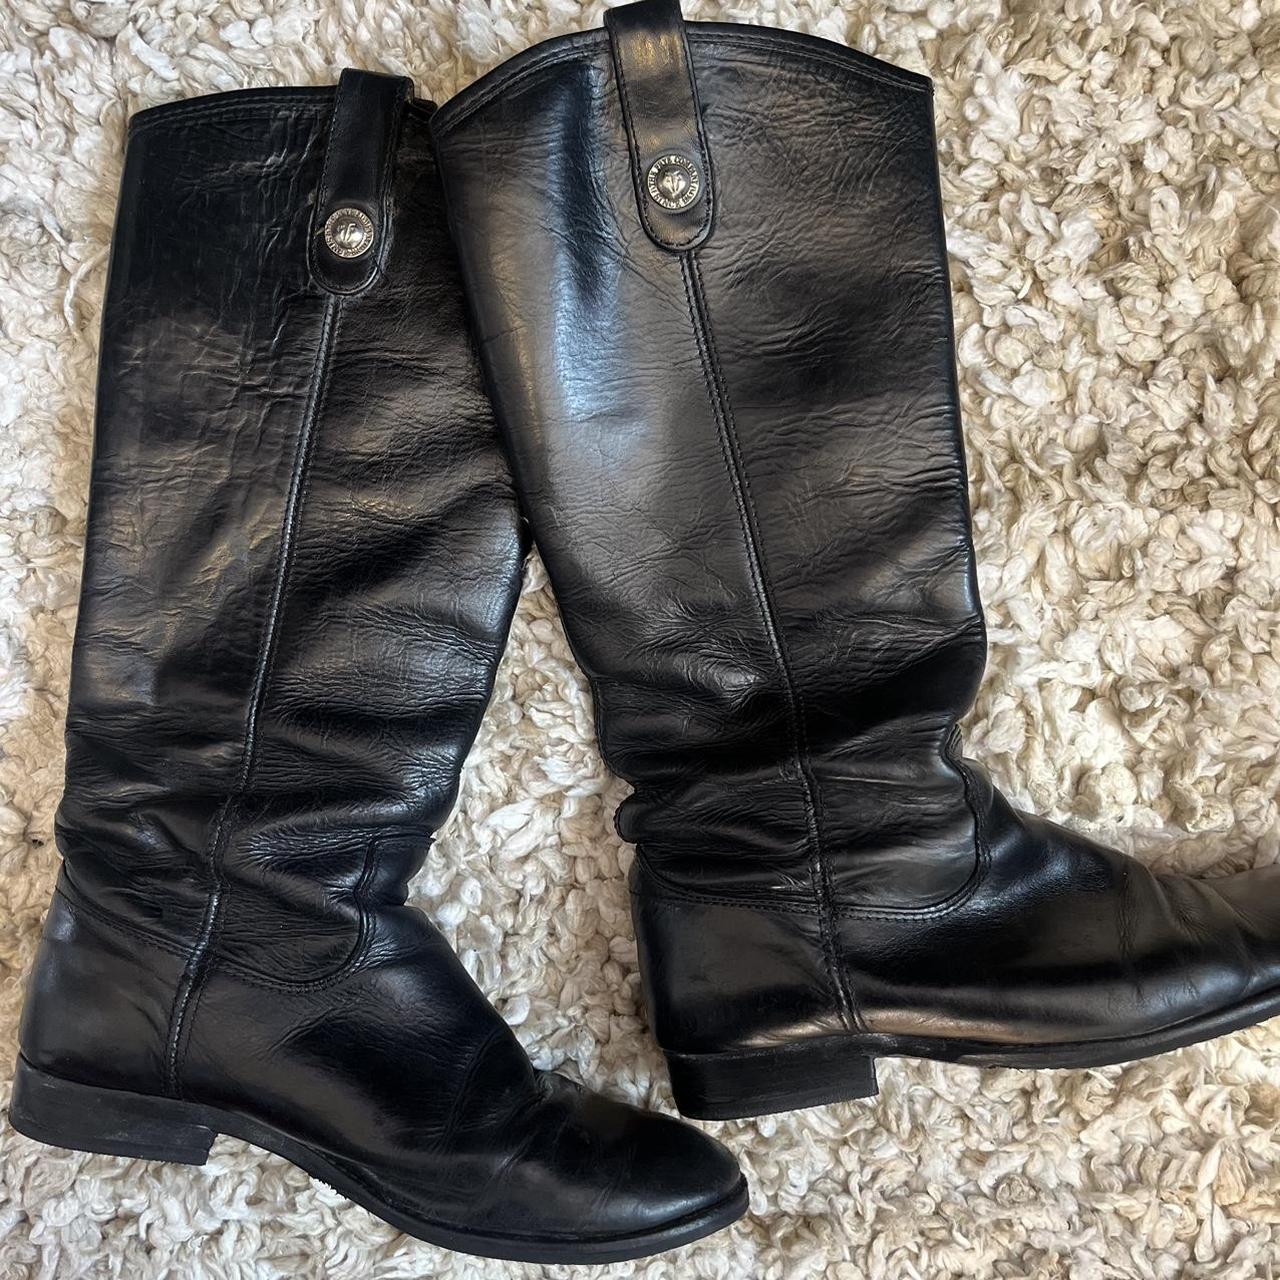 Frye Melissa Button Leather Tall Knee High Riding... - Depop